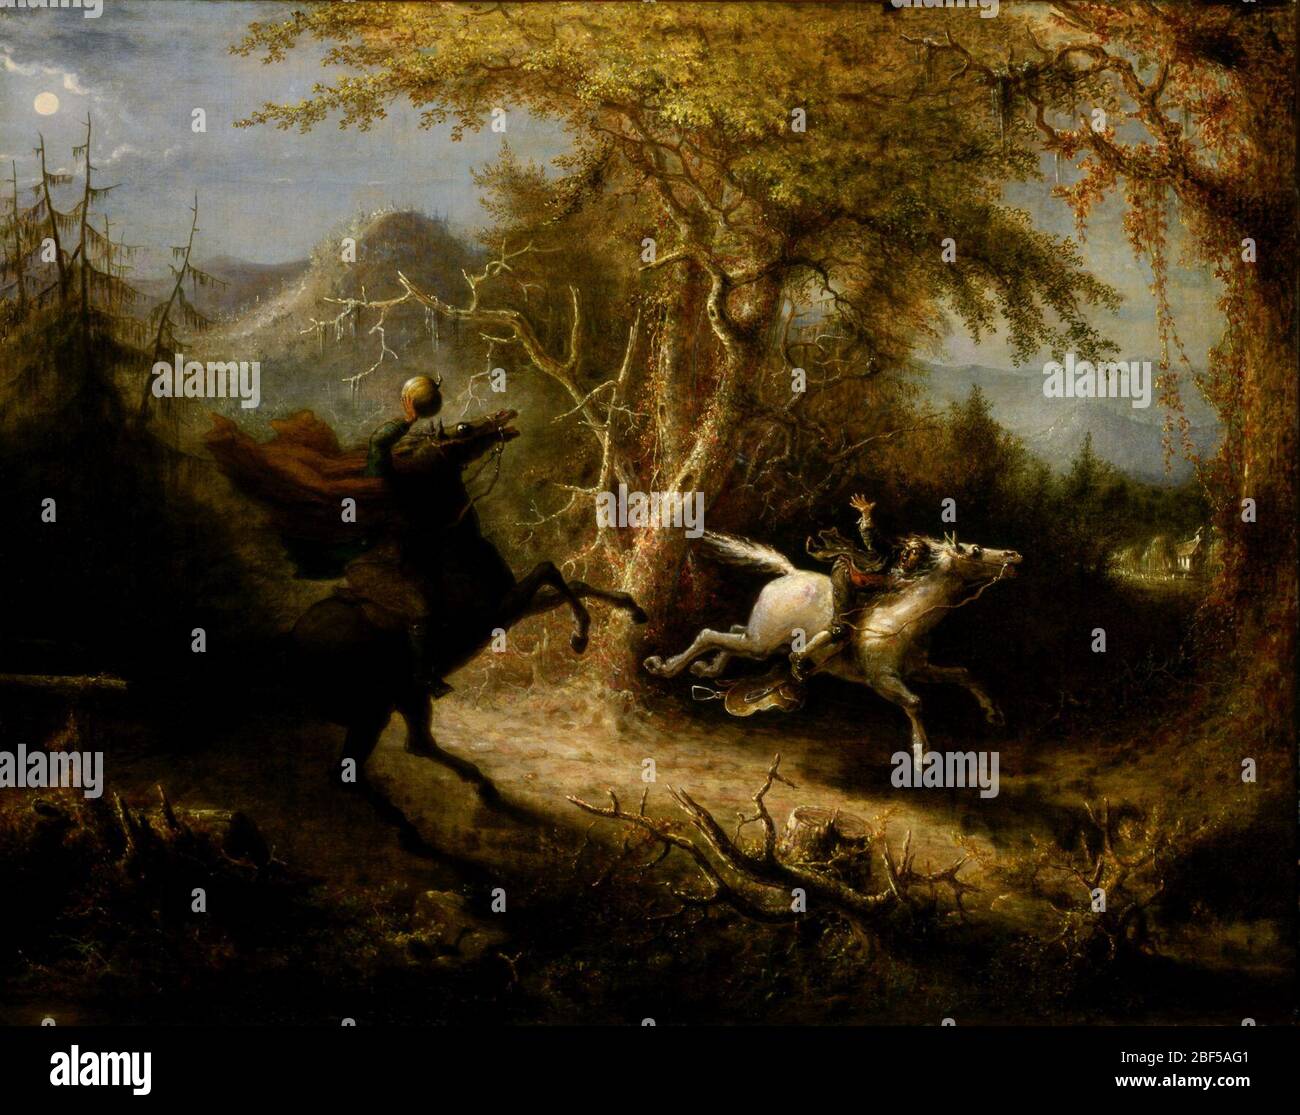 The Headless Horseman Pursuing Ichabod Crane. Washington Irving's 'The Legend of Sleepy Hollow' inspired Quidor to paint the climactic moment from this famous tale. Ichabod Crane is a prickly and stuck-up schoolmaster and a bumbling suitor for the lovely Katrina, who uses him to make her beau jealous. Stock Photo